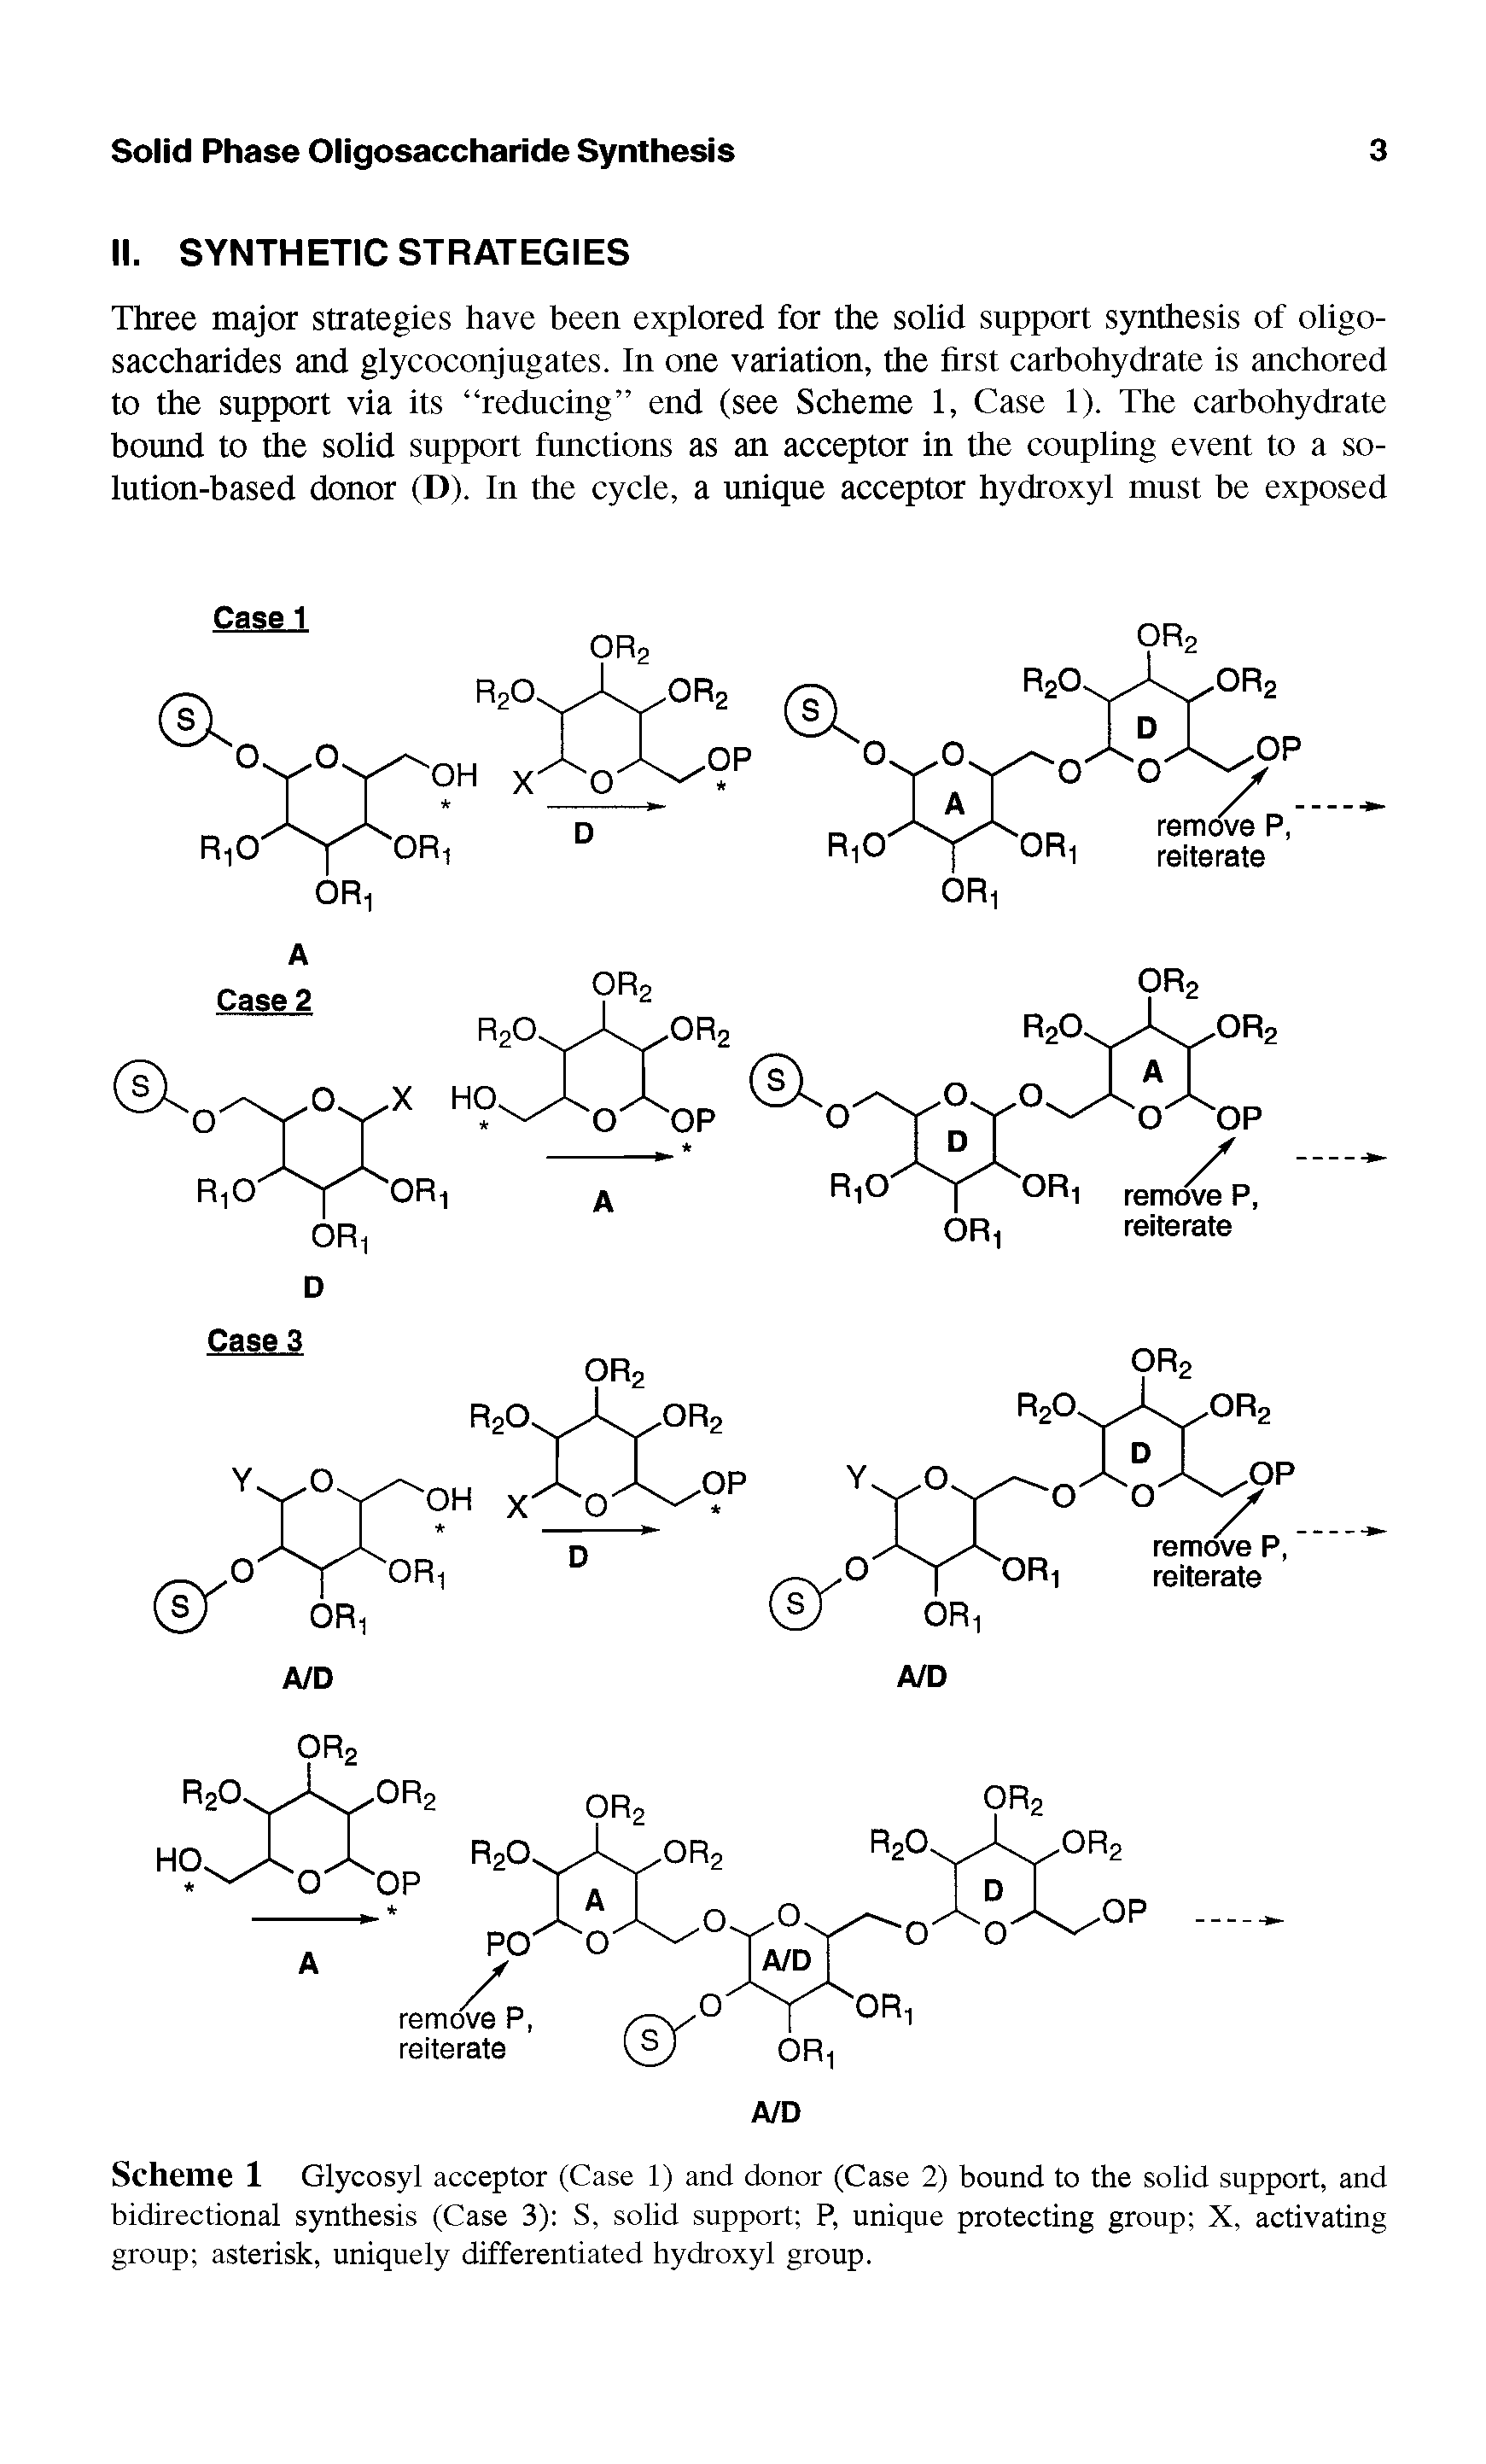 Scheme 1 Glycosyl acceptor (Case 1) and donor (Case 2) bound to the solid support, and bidirectional synthesis (Case 3) S, solid support P, unique protecting group X, activating group asterisk, uniquely differentiated hydroxyl group.